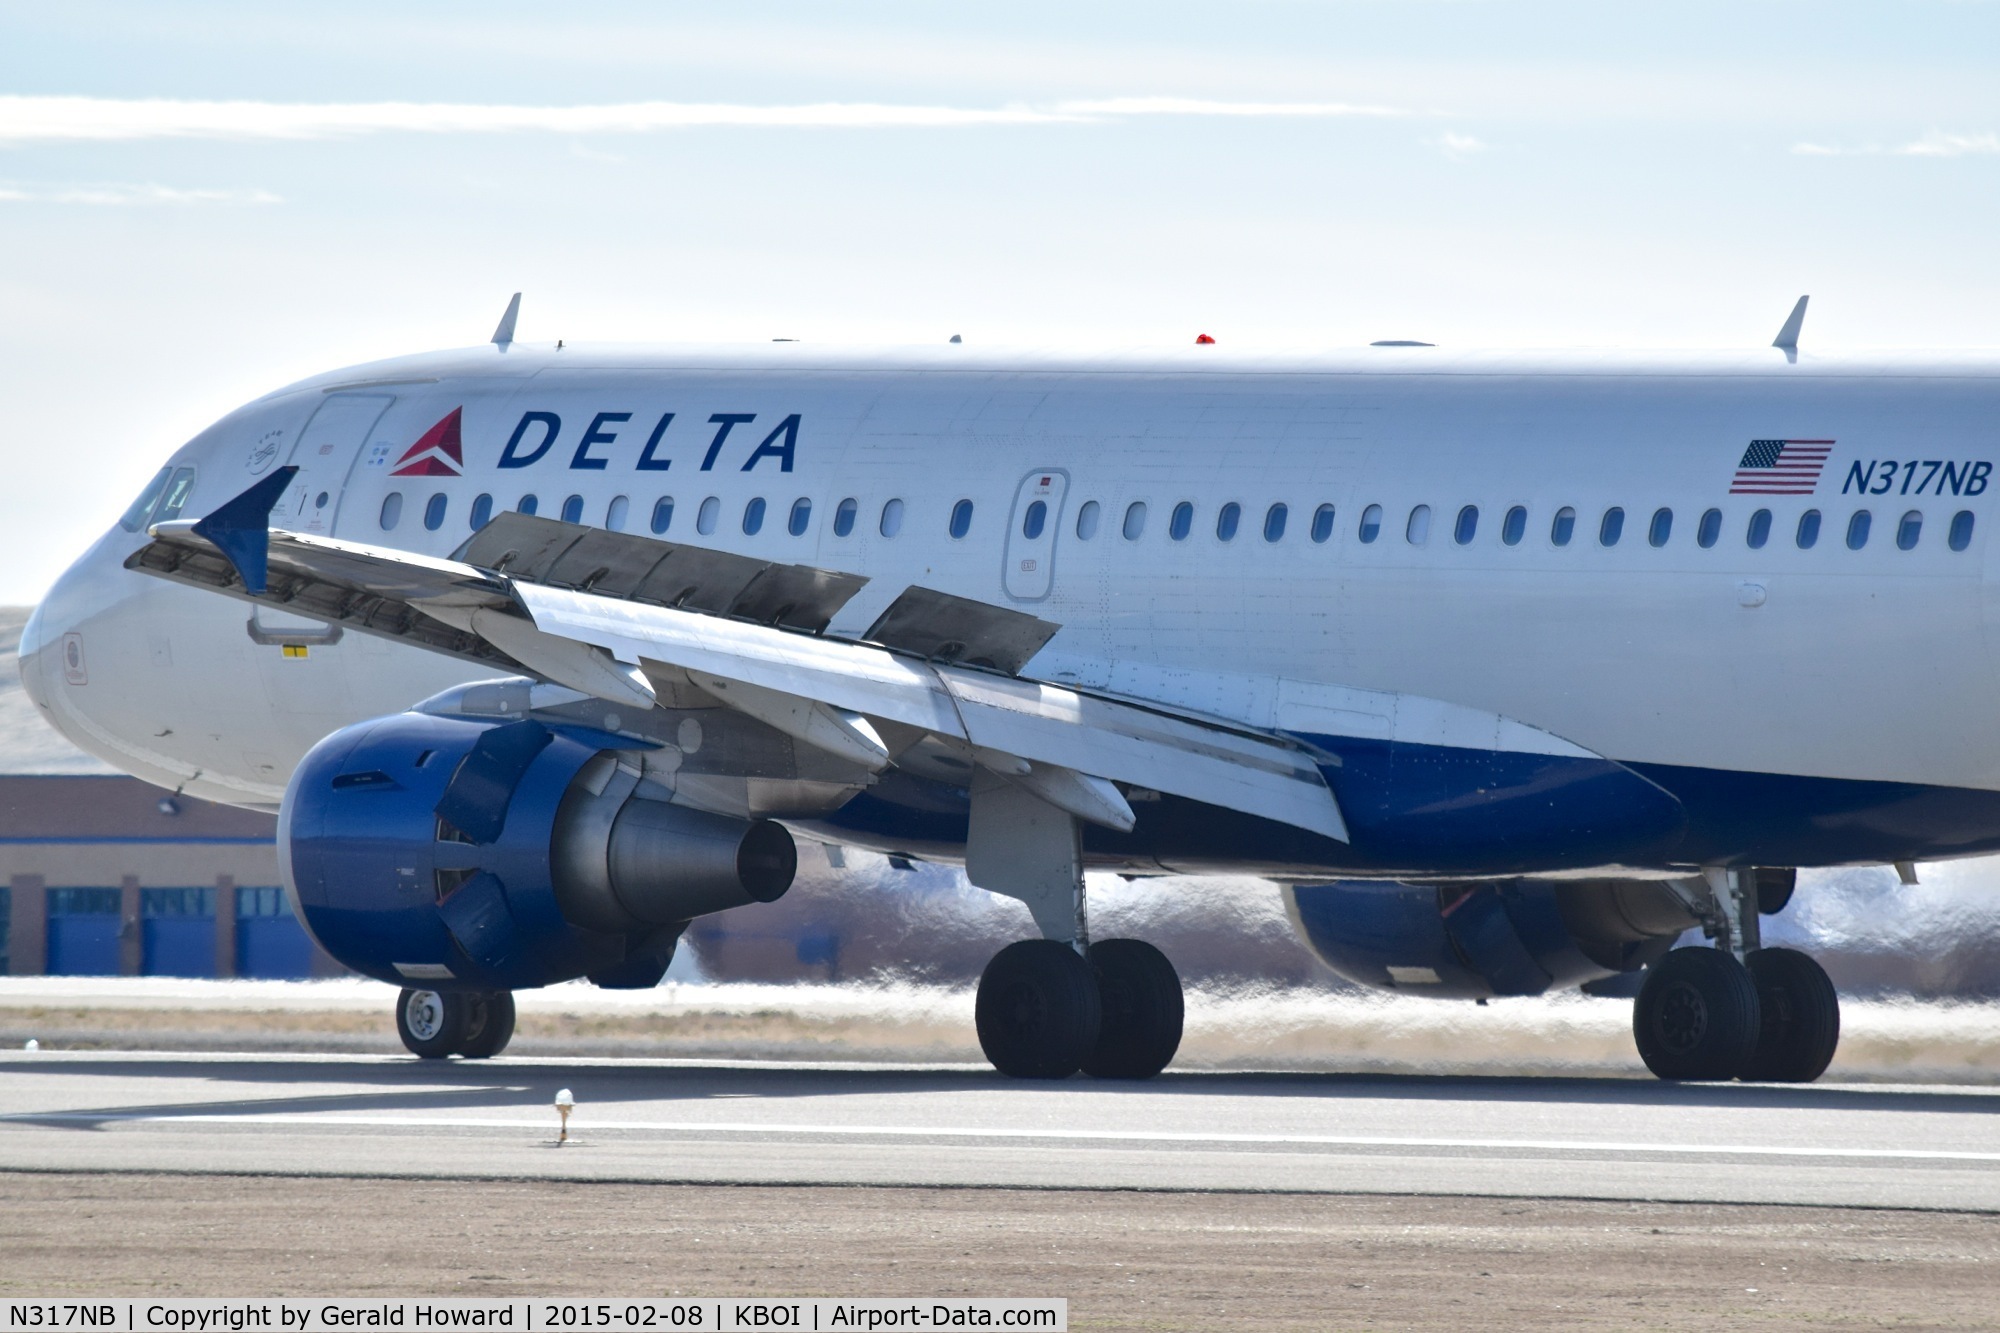 N317NB, 2000 Airbus A319-114 C/N 1324, Slowing down with reverts thrusters et al.